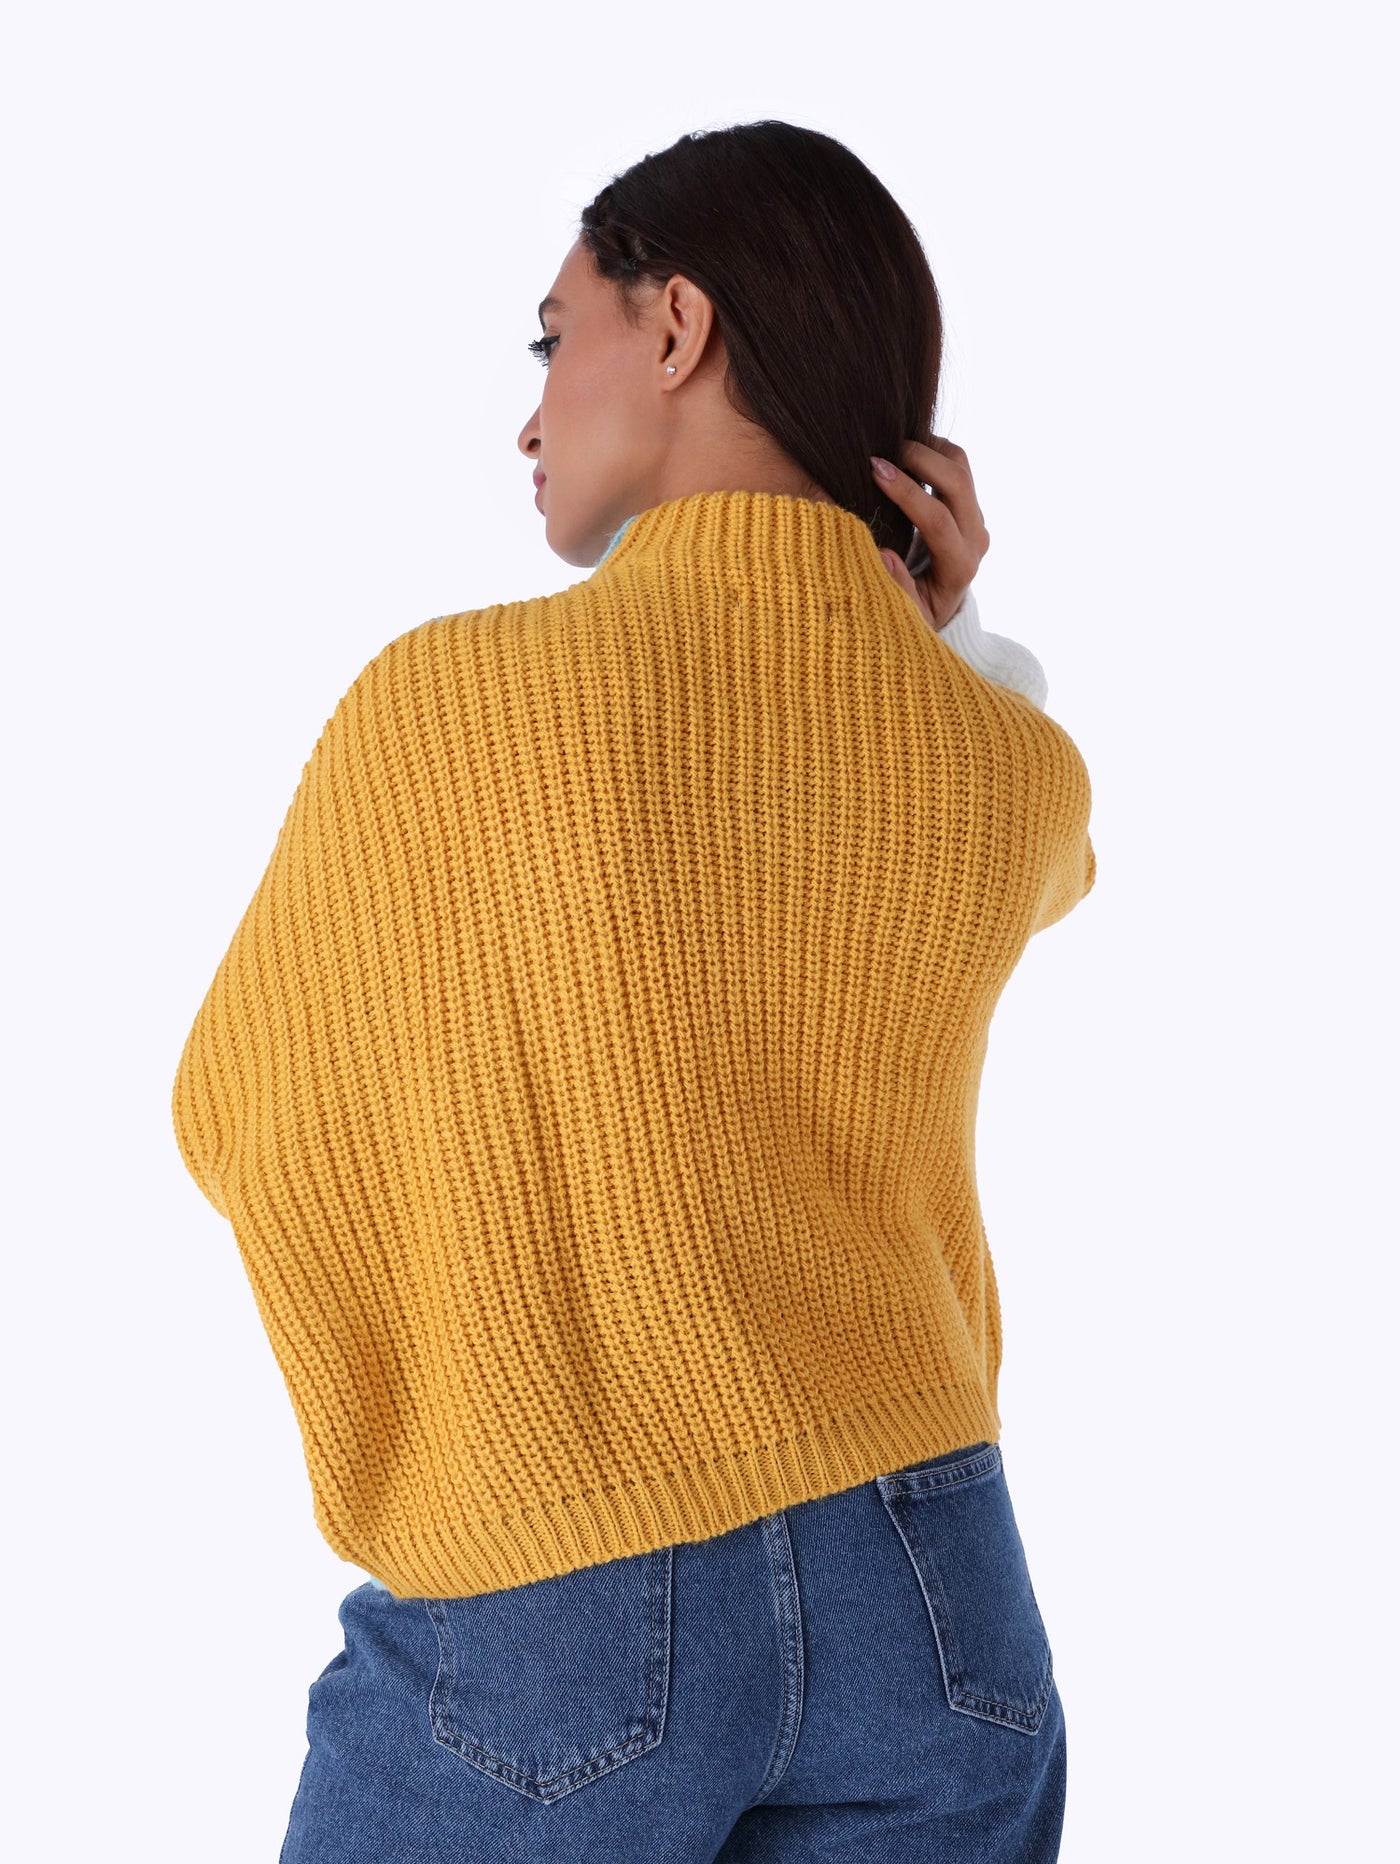 High Neck Knitted Pullover - Over Sized